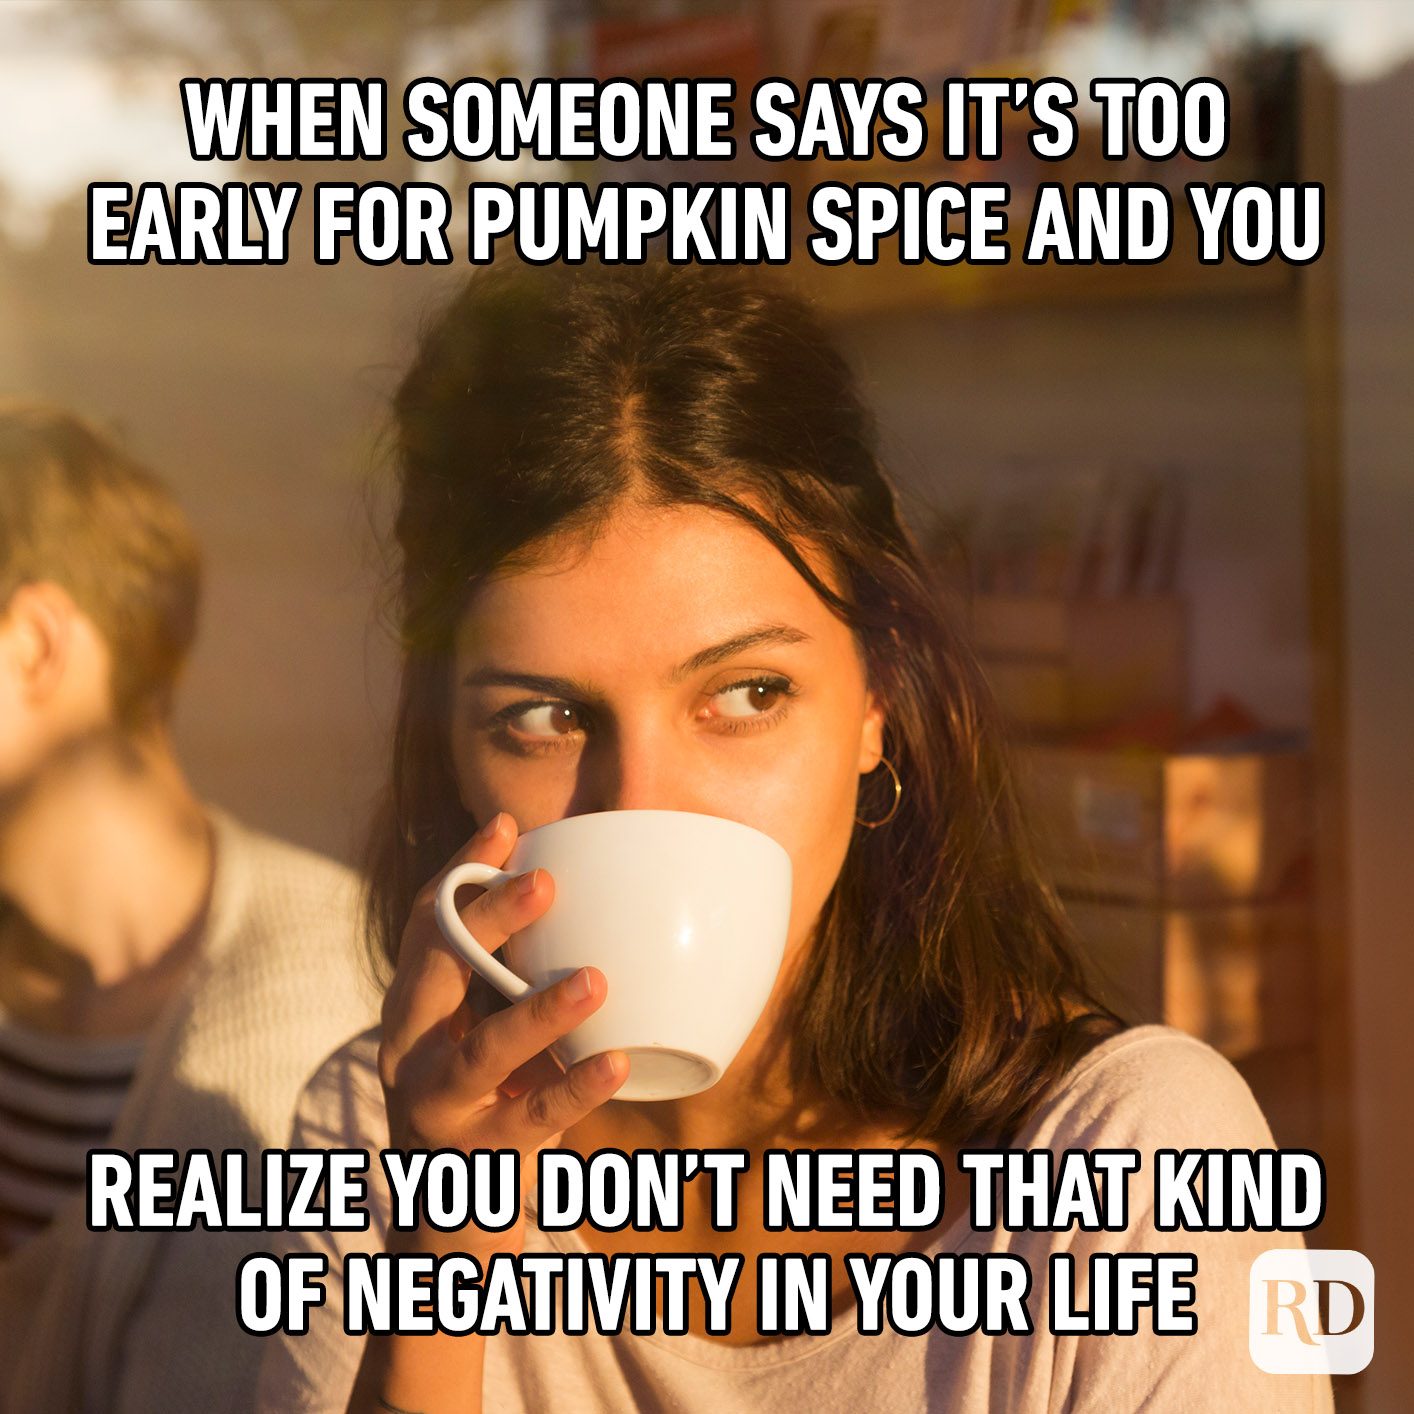 When Someone Says It’s Too Early For Pumpkin Spice And You Realize You Don’t Need That Kind Of Negativity In Your Life